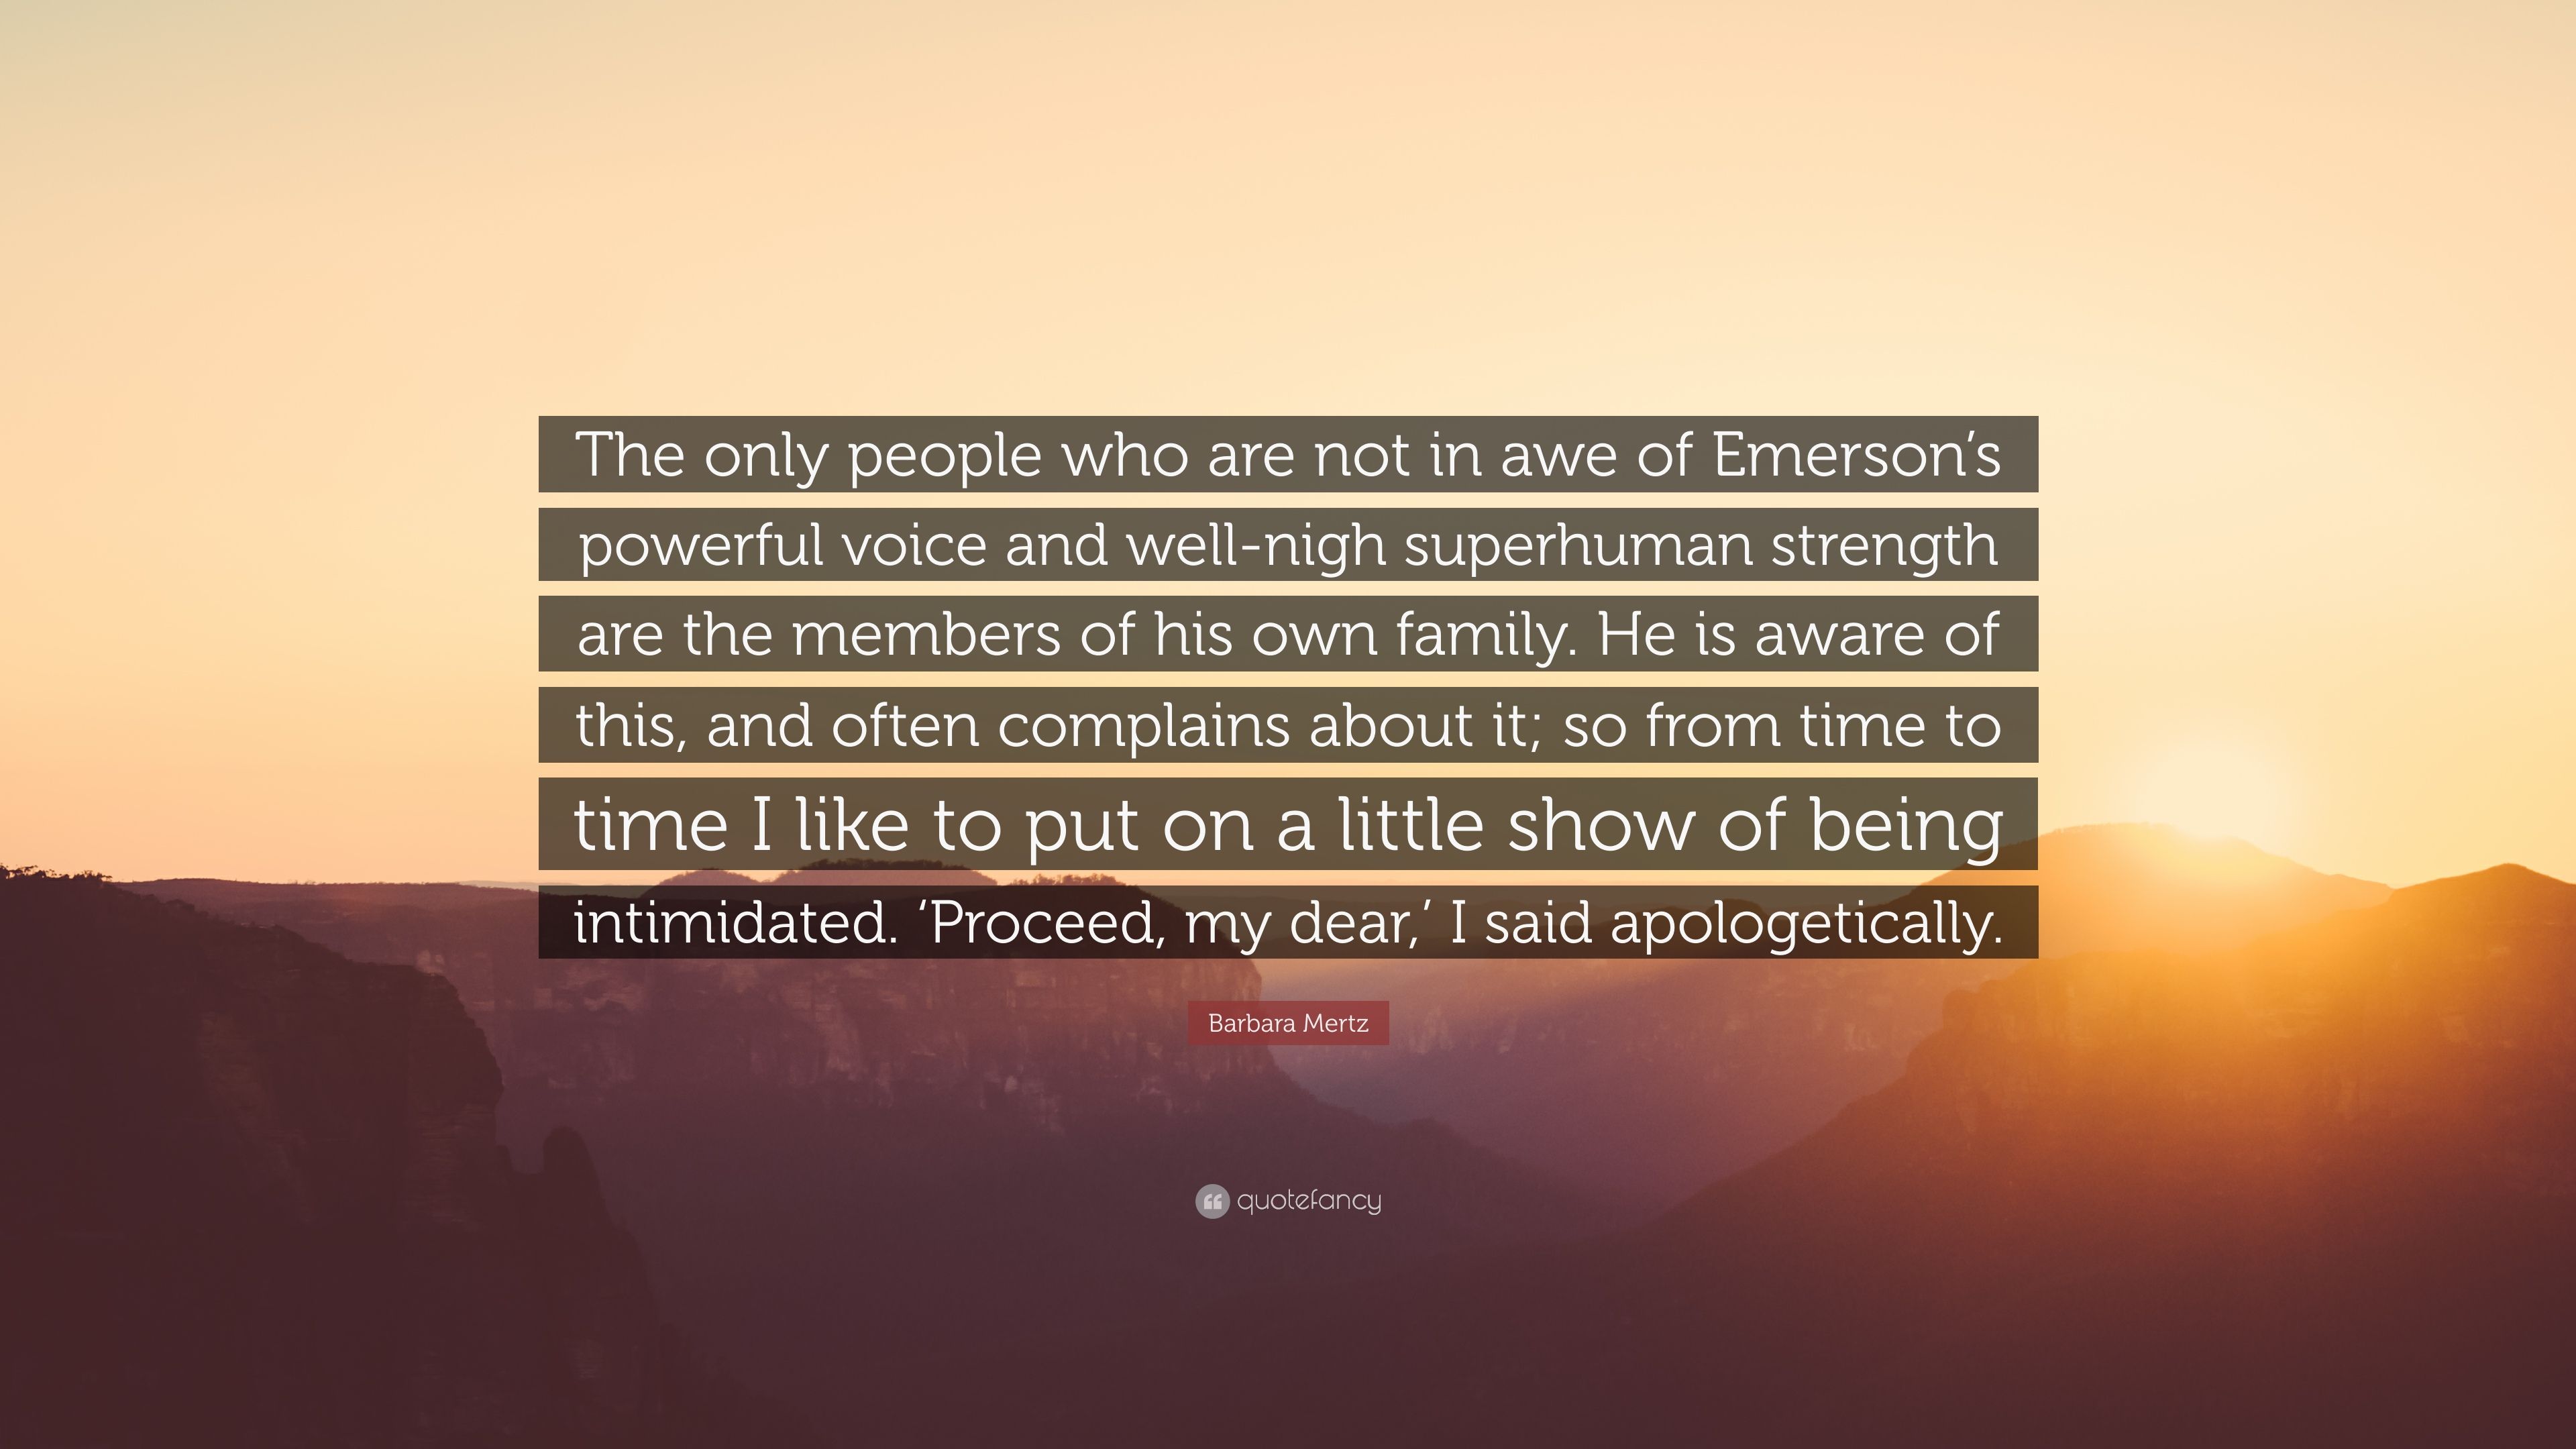 Barbara Mertz Quote: “The Only People Who Are Not In Awe Of Emerson's Powerful Voice And Well Nigh Superhuman Strength Are The Members Of His .” (7 Wallpaper)